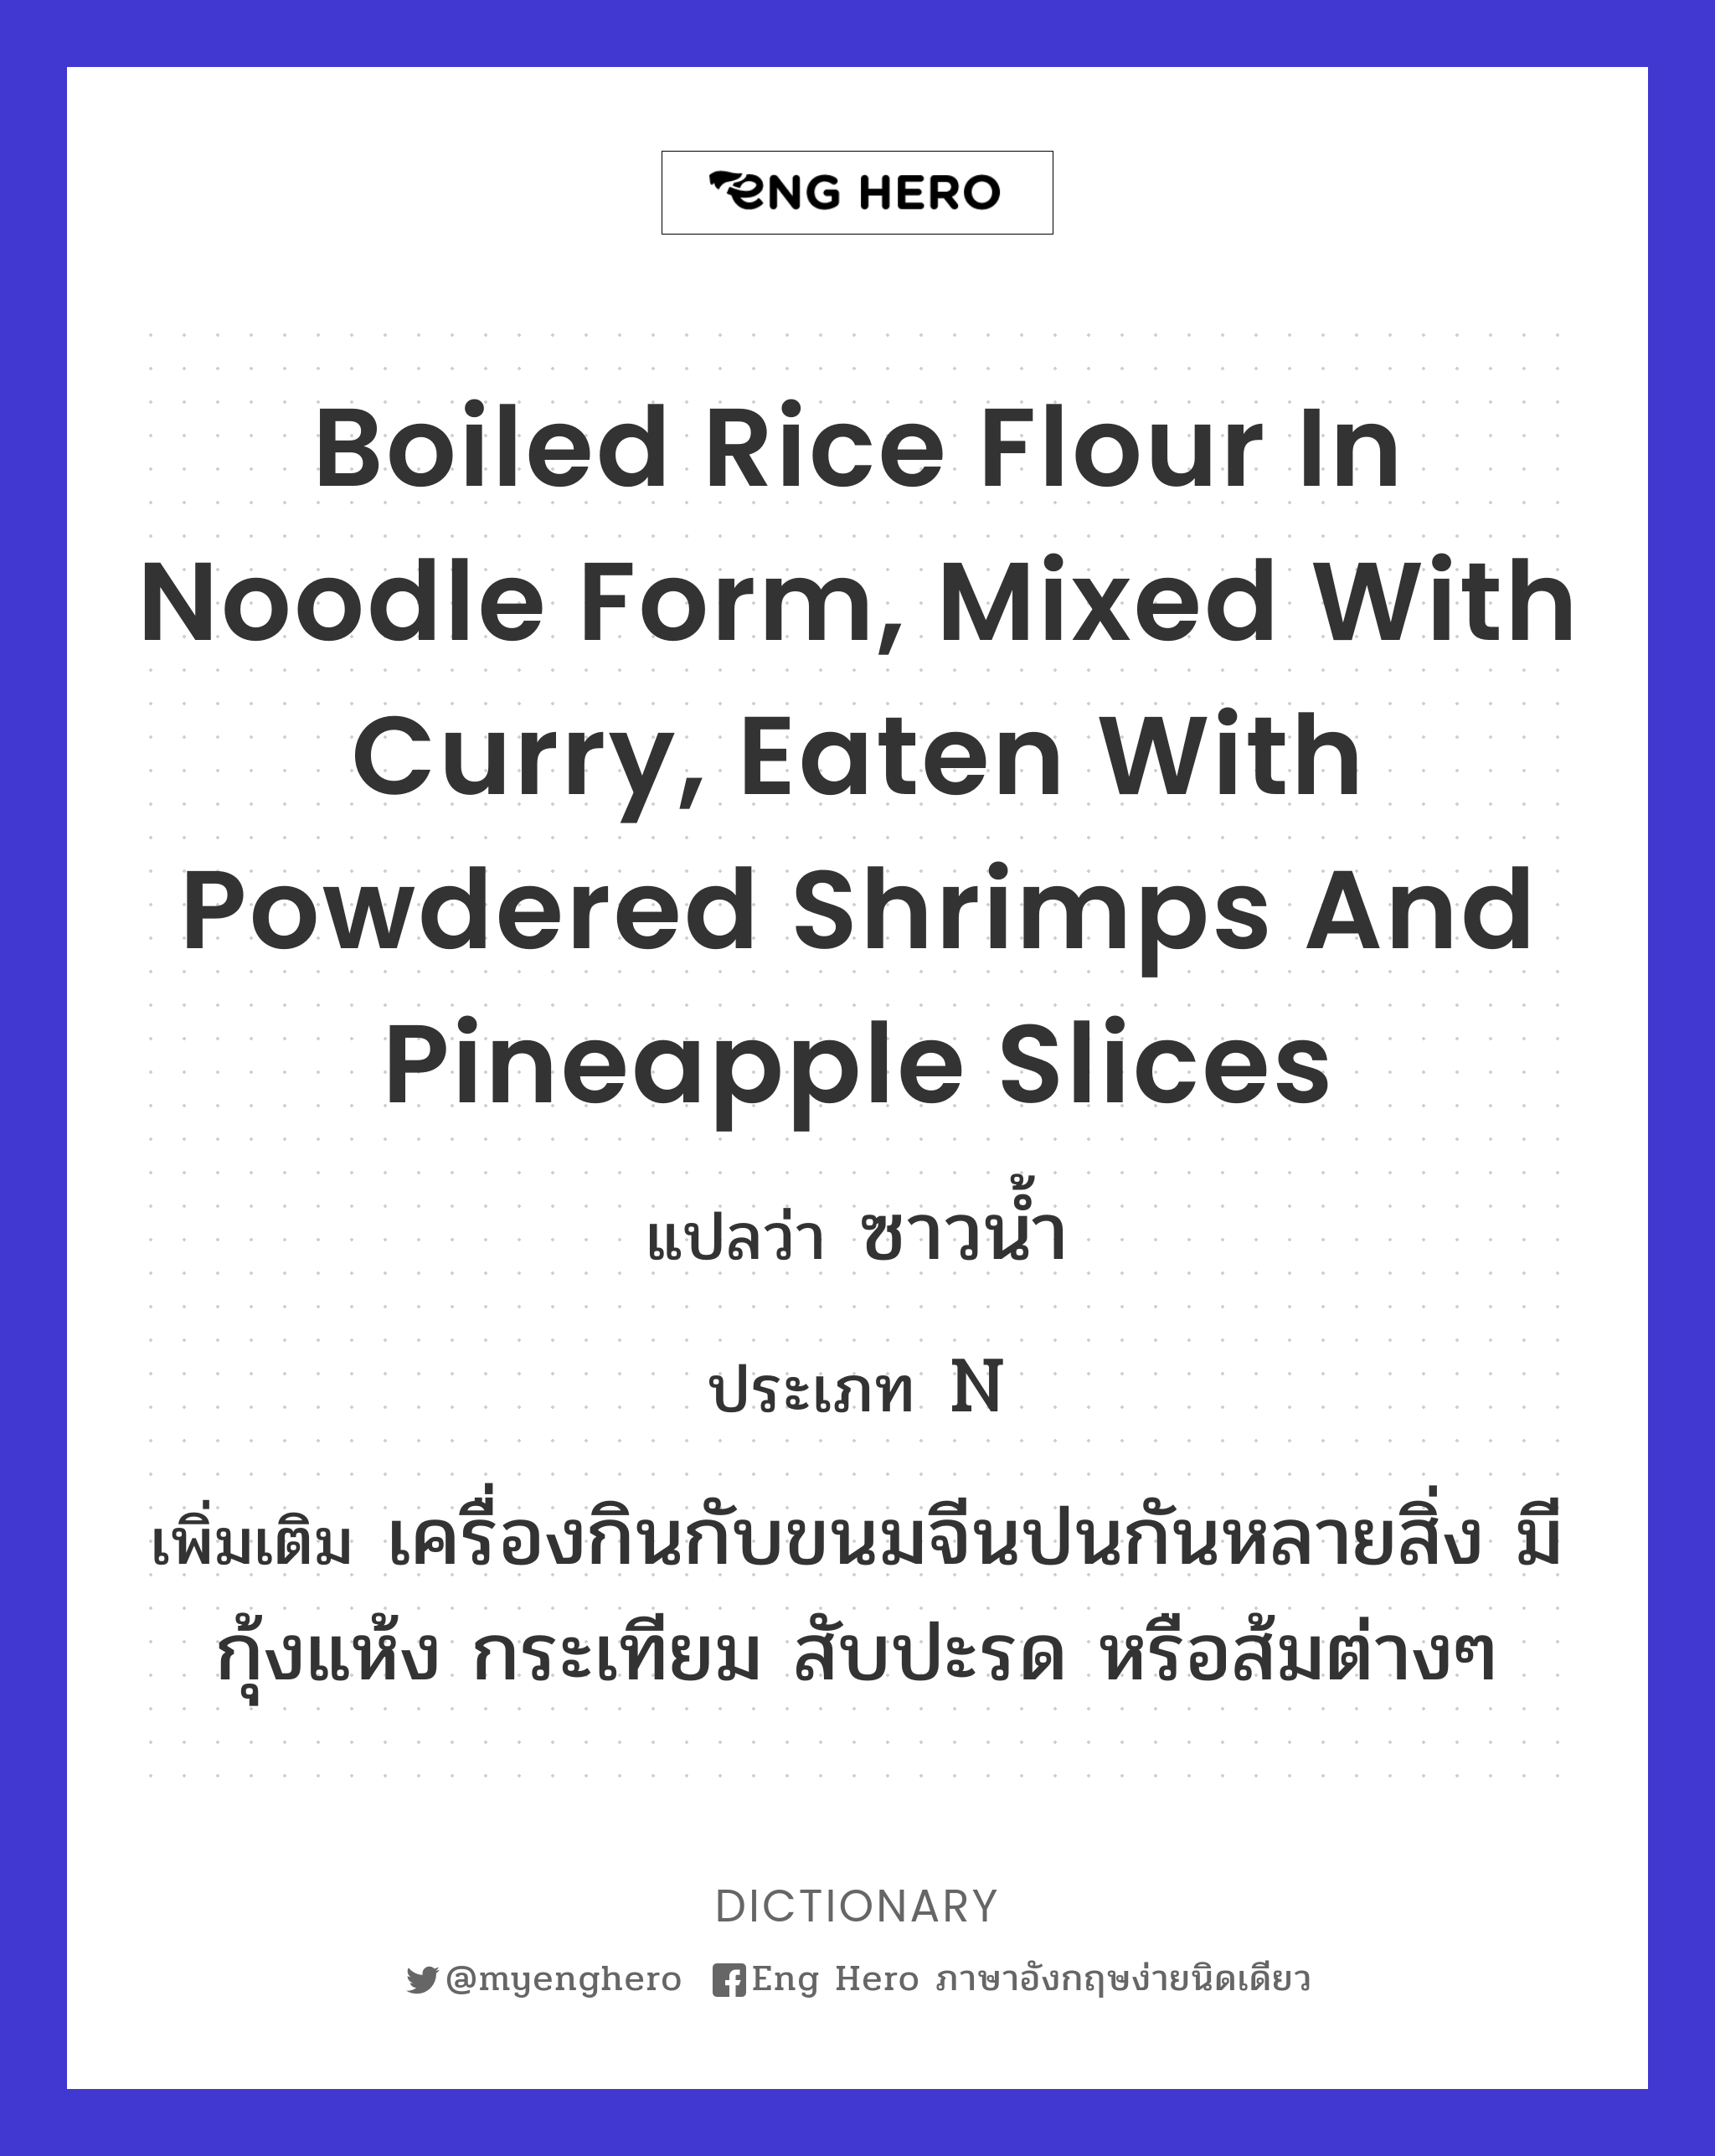 boiled rice flour in noodle form, mixed with curry, eaten with powdered shrimps and pineapple slices